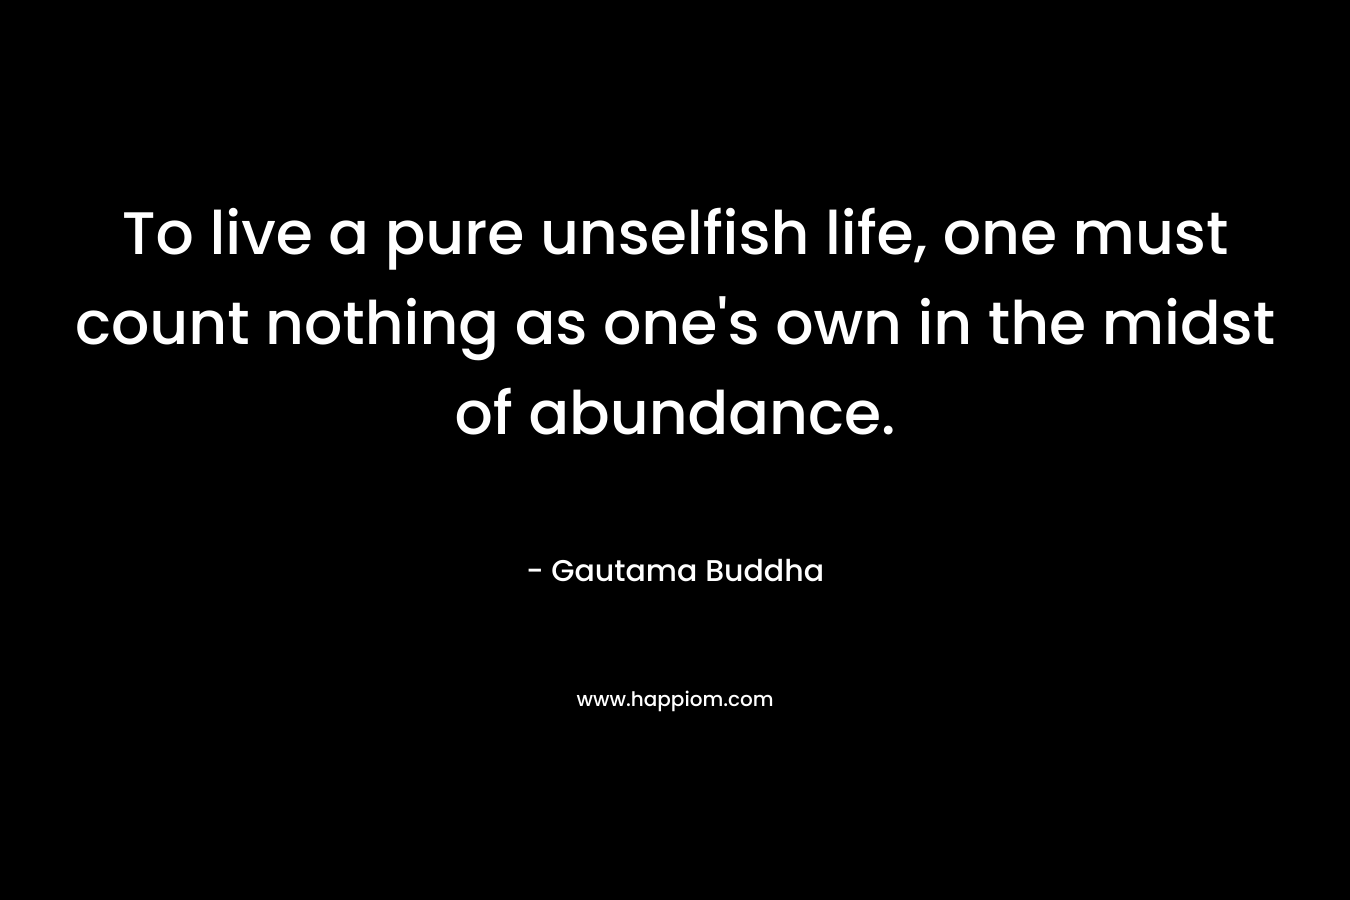 To live a pure unselfish life, one must count nothing as one’s own in the midst of abundance. – Gautama Buddha